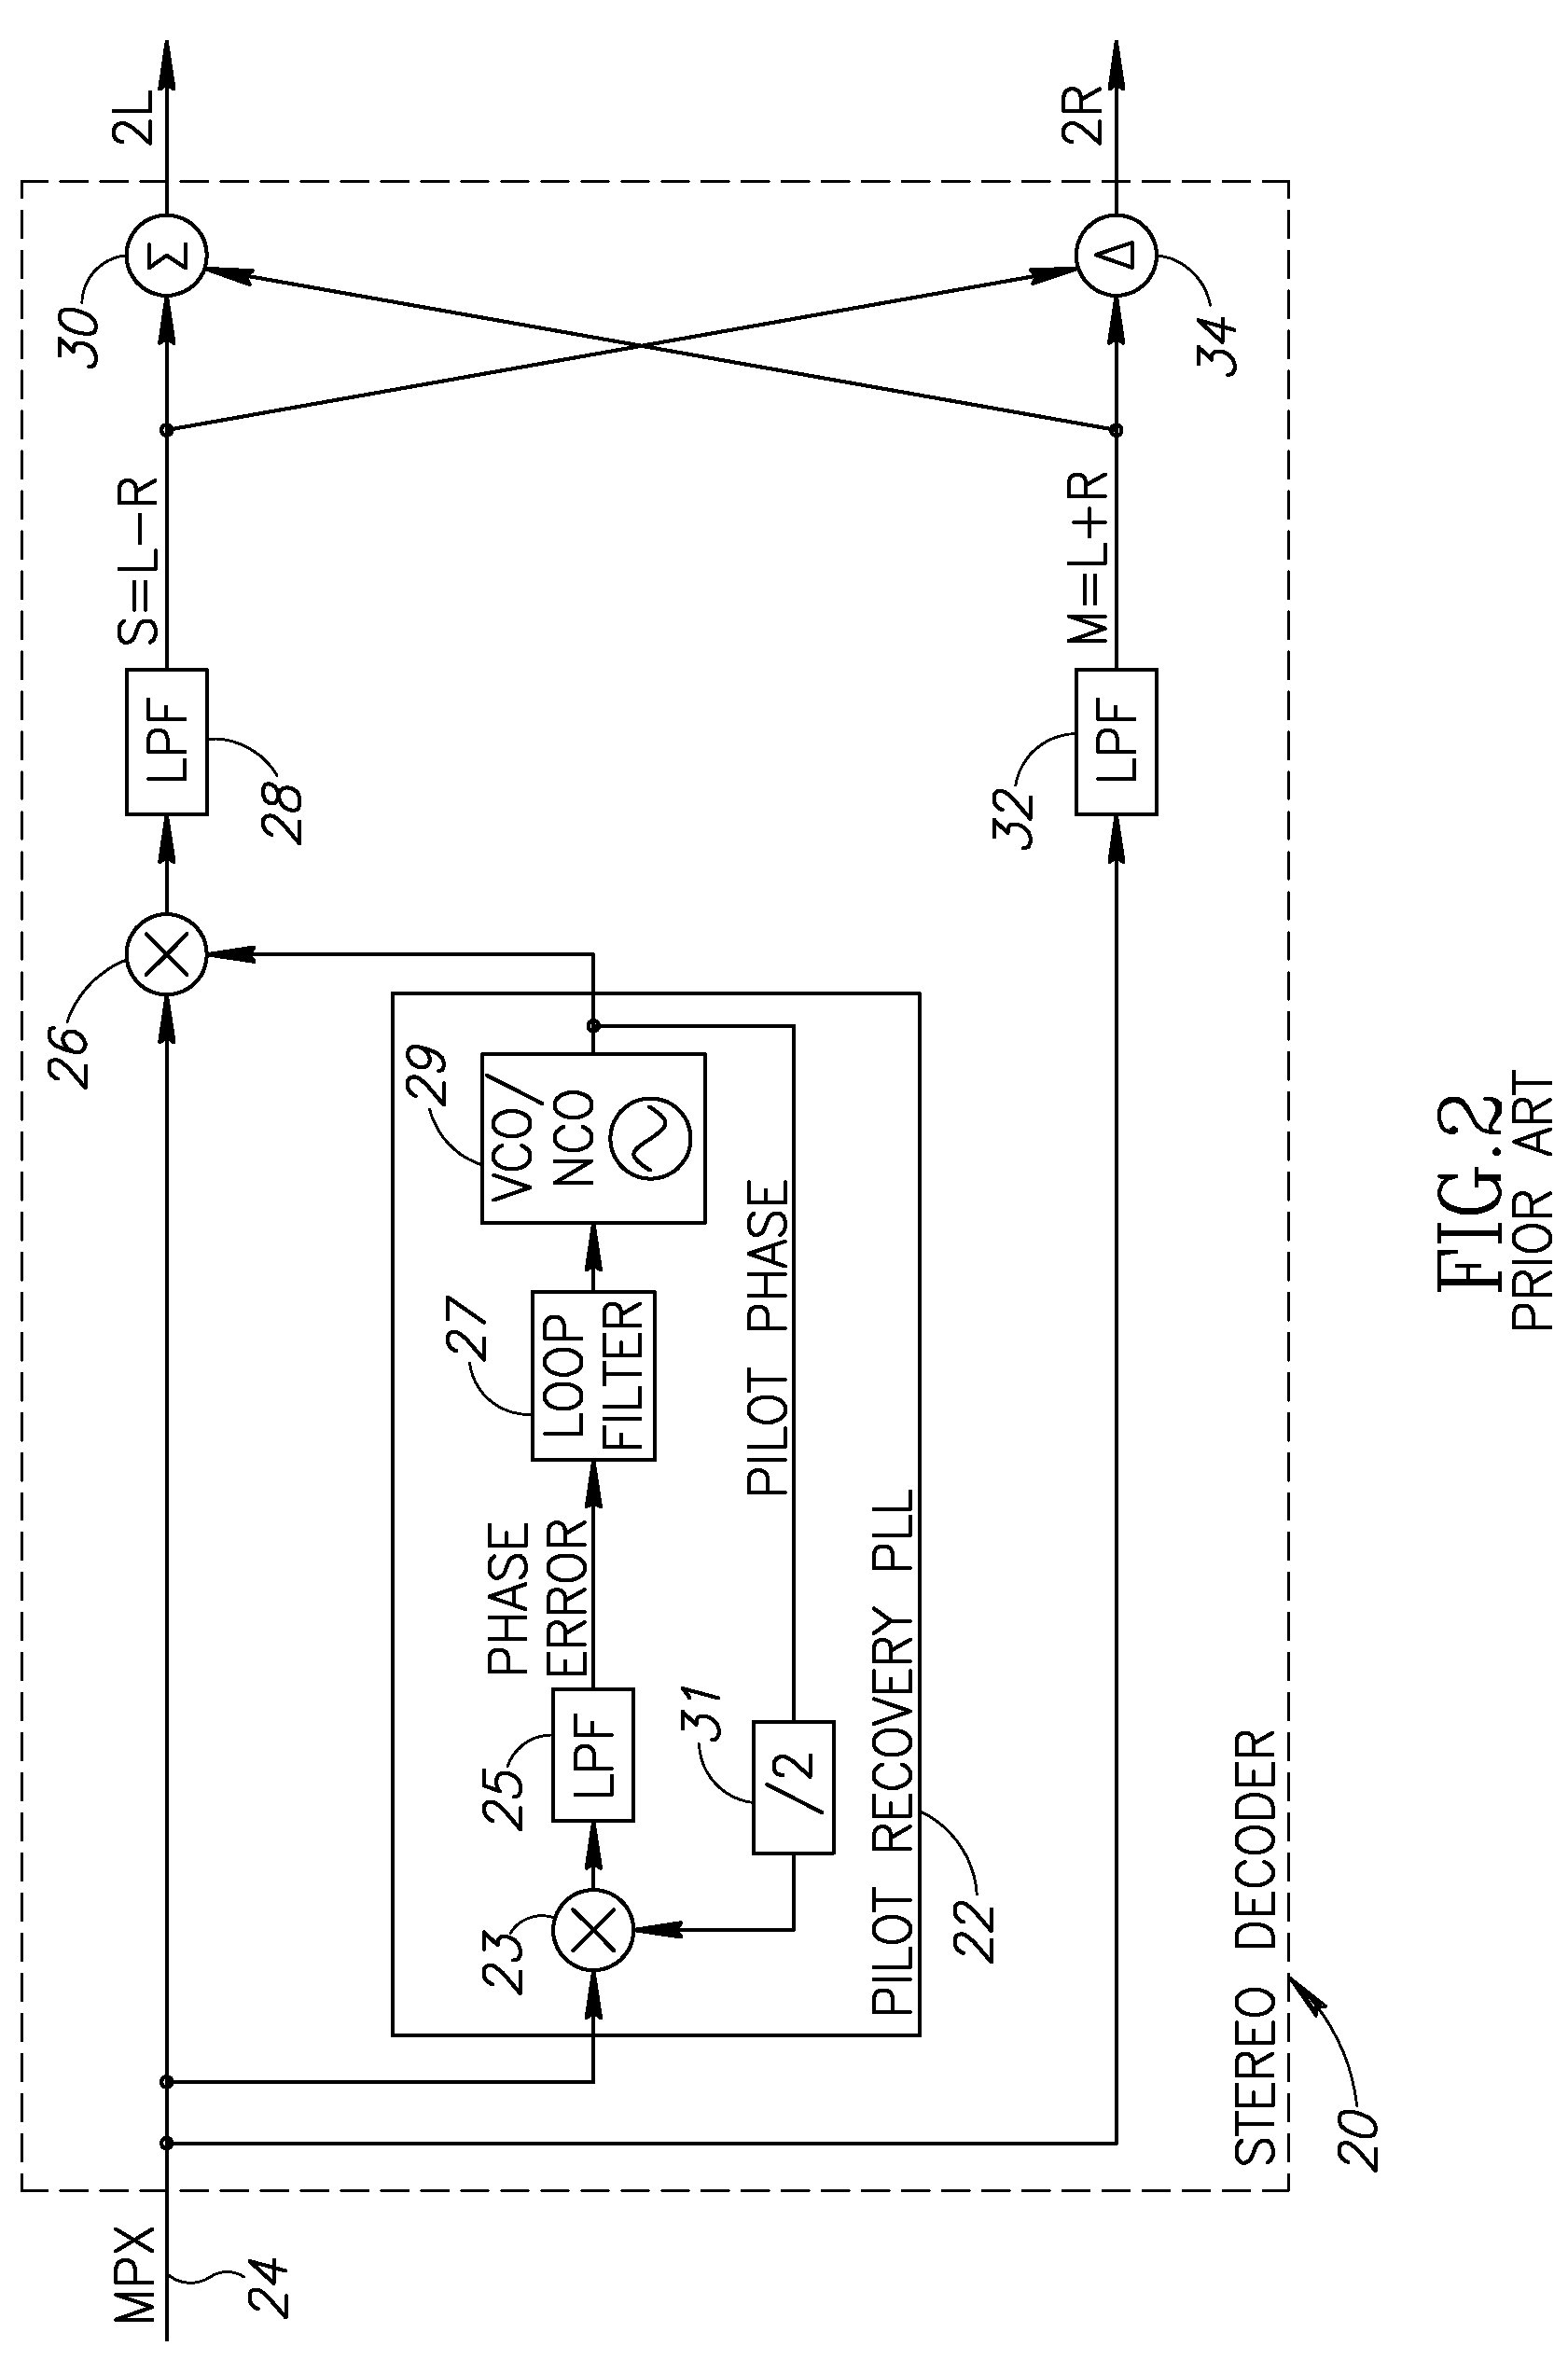 FM stereo decoder incorporating Costas loop pilot to stereo component phase correction